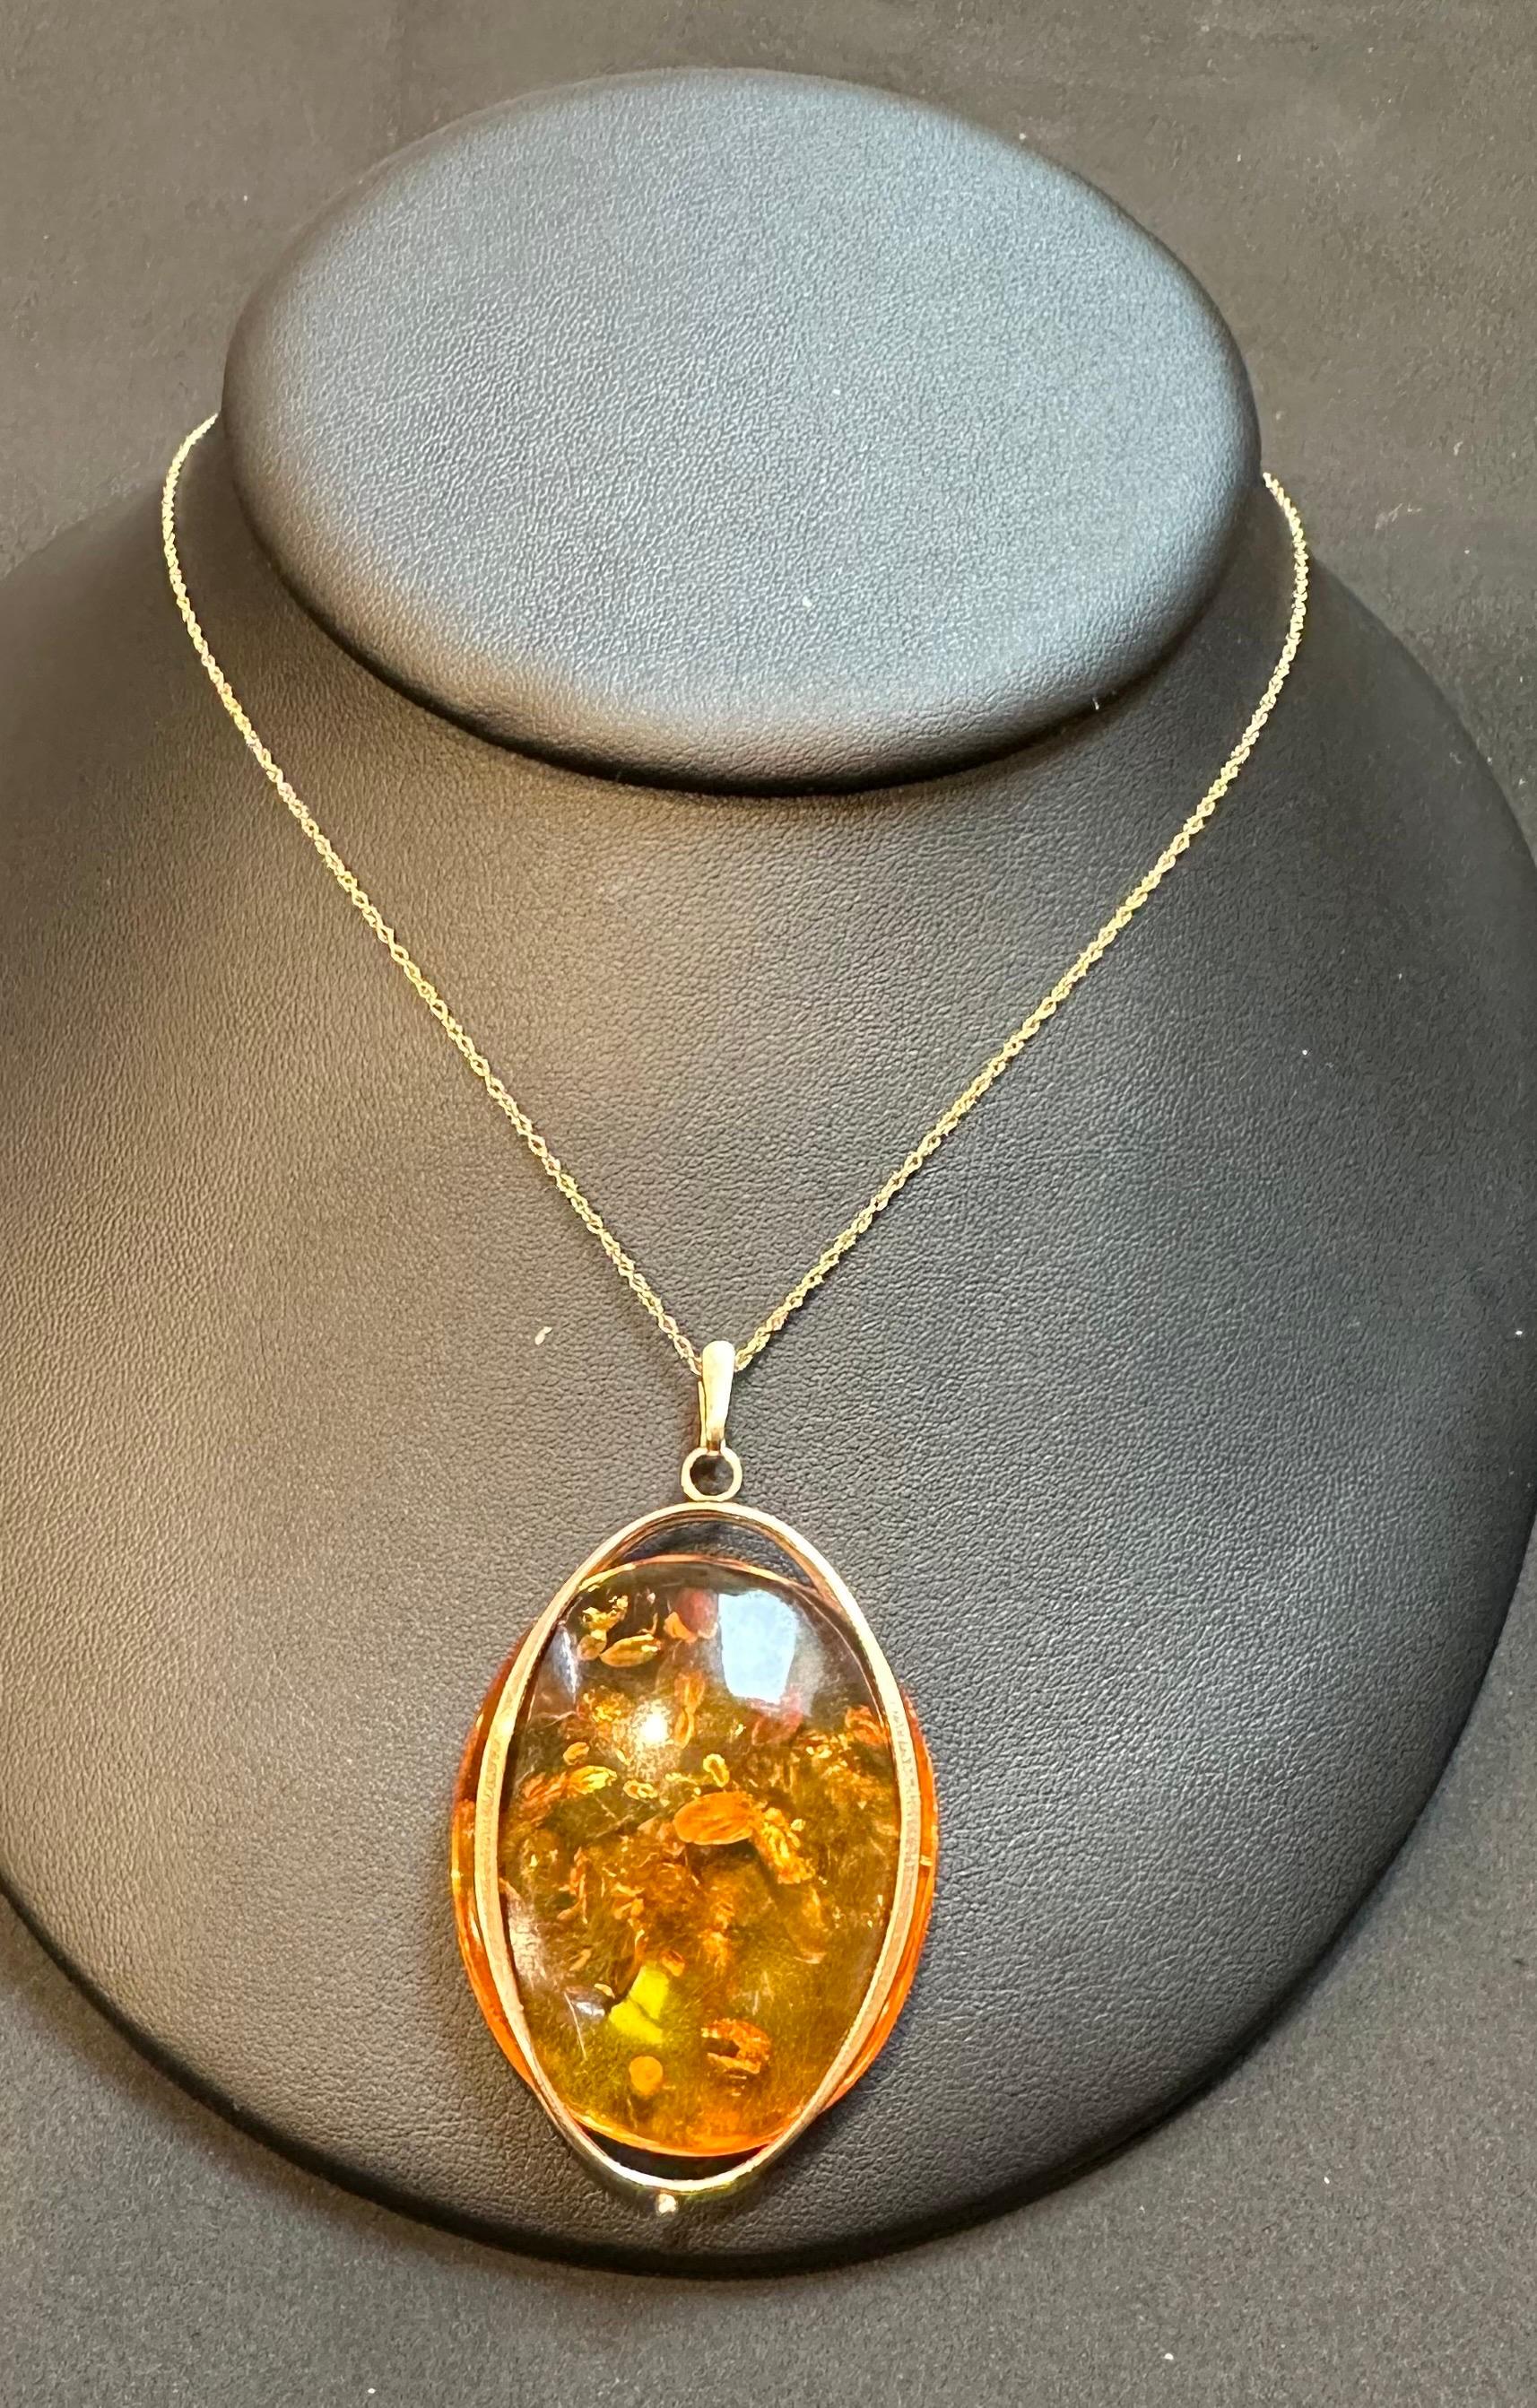 Large Natural Russian Amber Necklace or Pendant in 14 Karat Yellow Gold + Chain 1